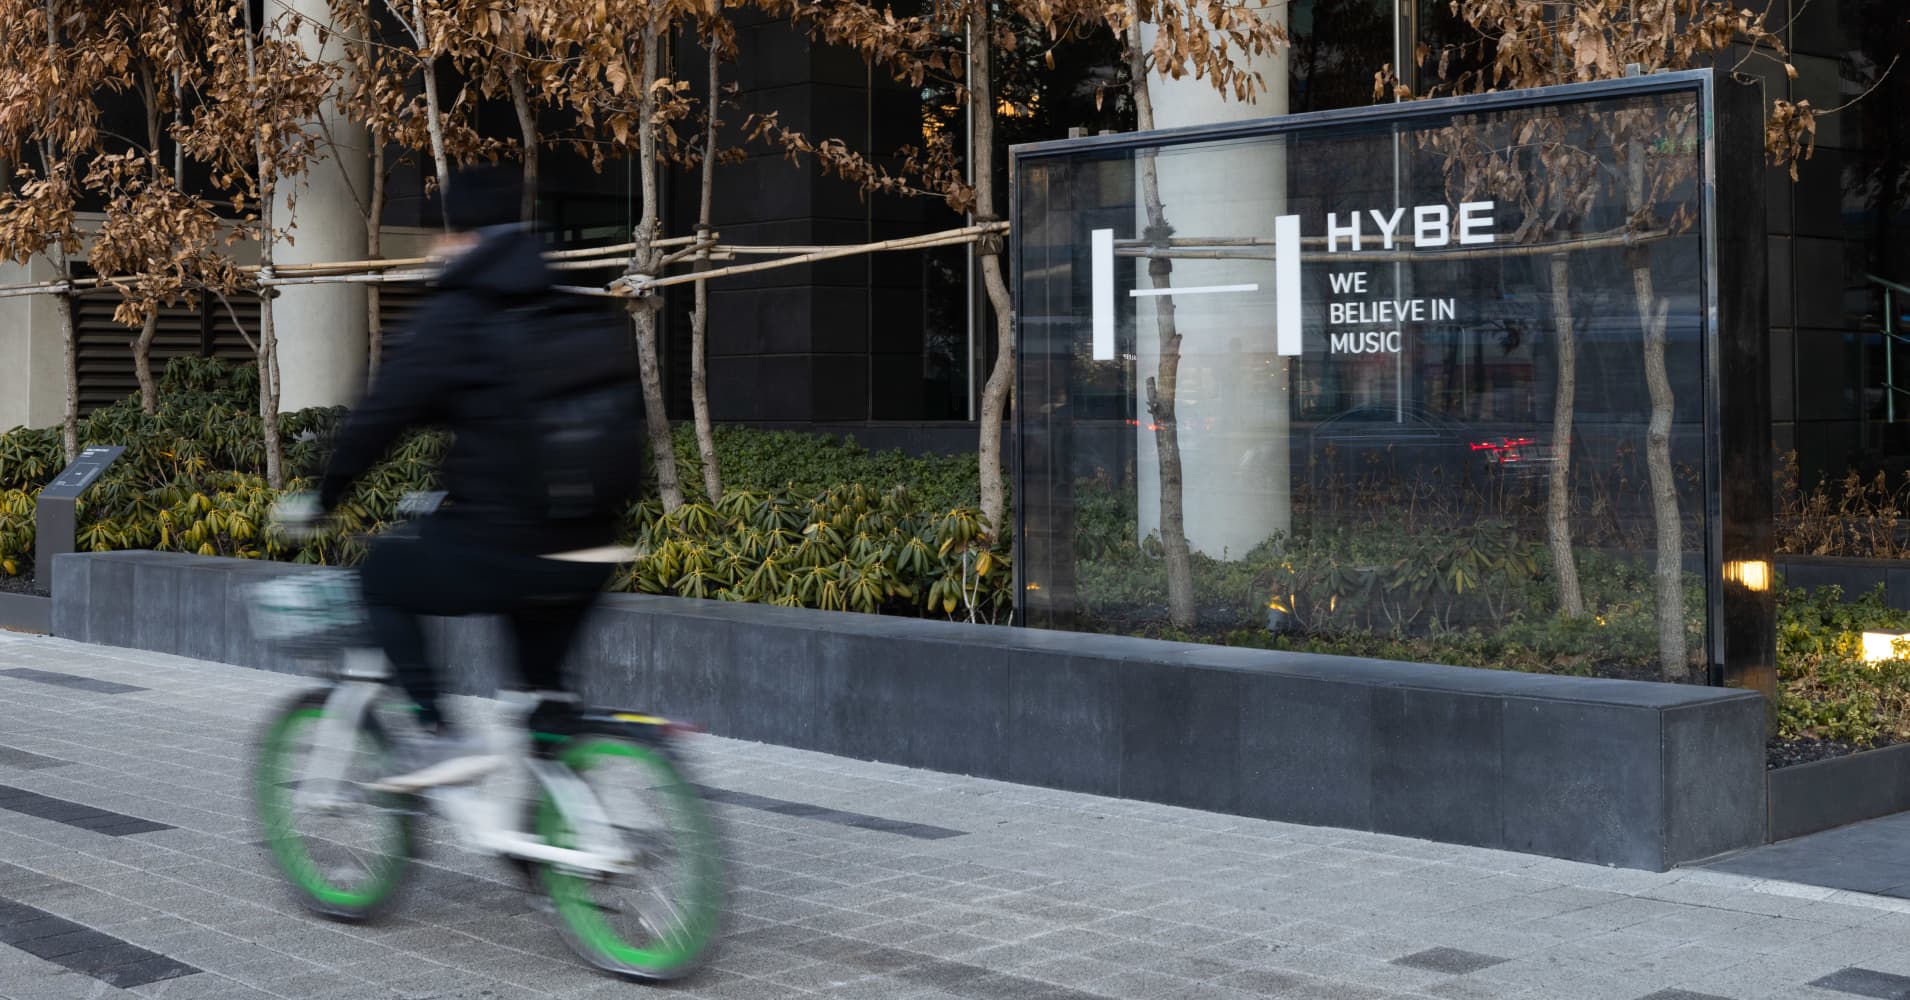 south korea's largest k-pop agency hybe accuses sublabel executives of breach of trust